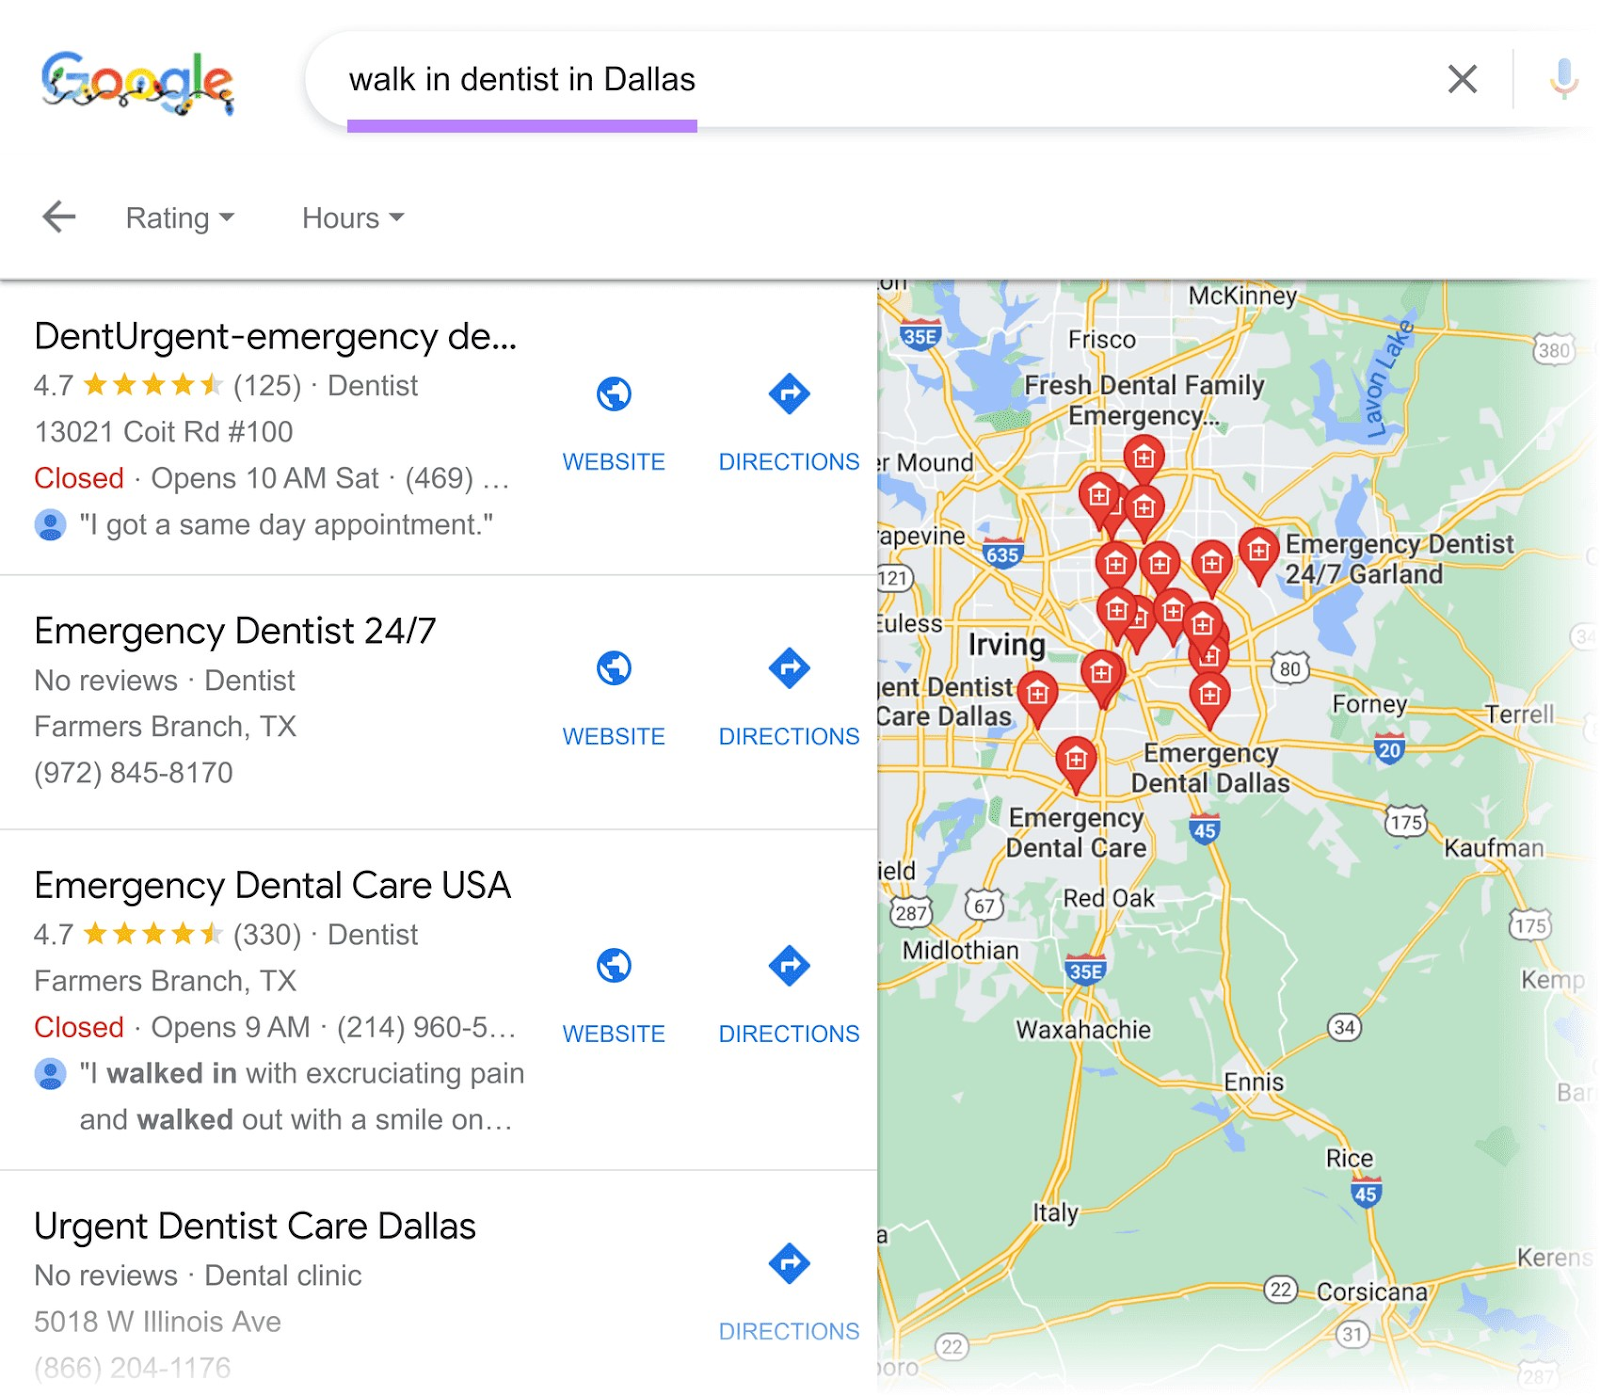 Google Local Finder results for "walk in dentist in Dallas" query